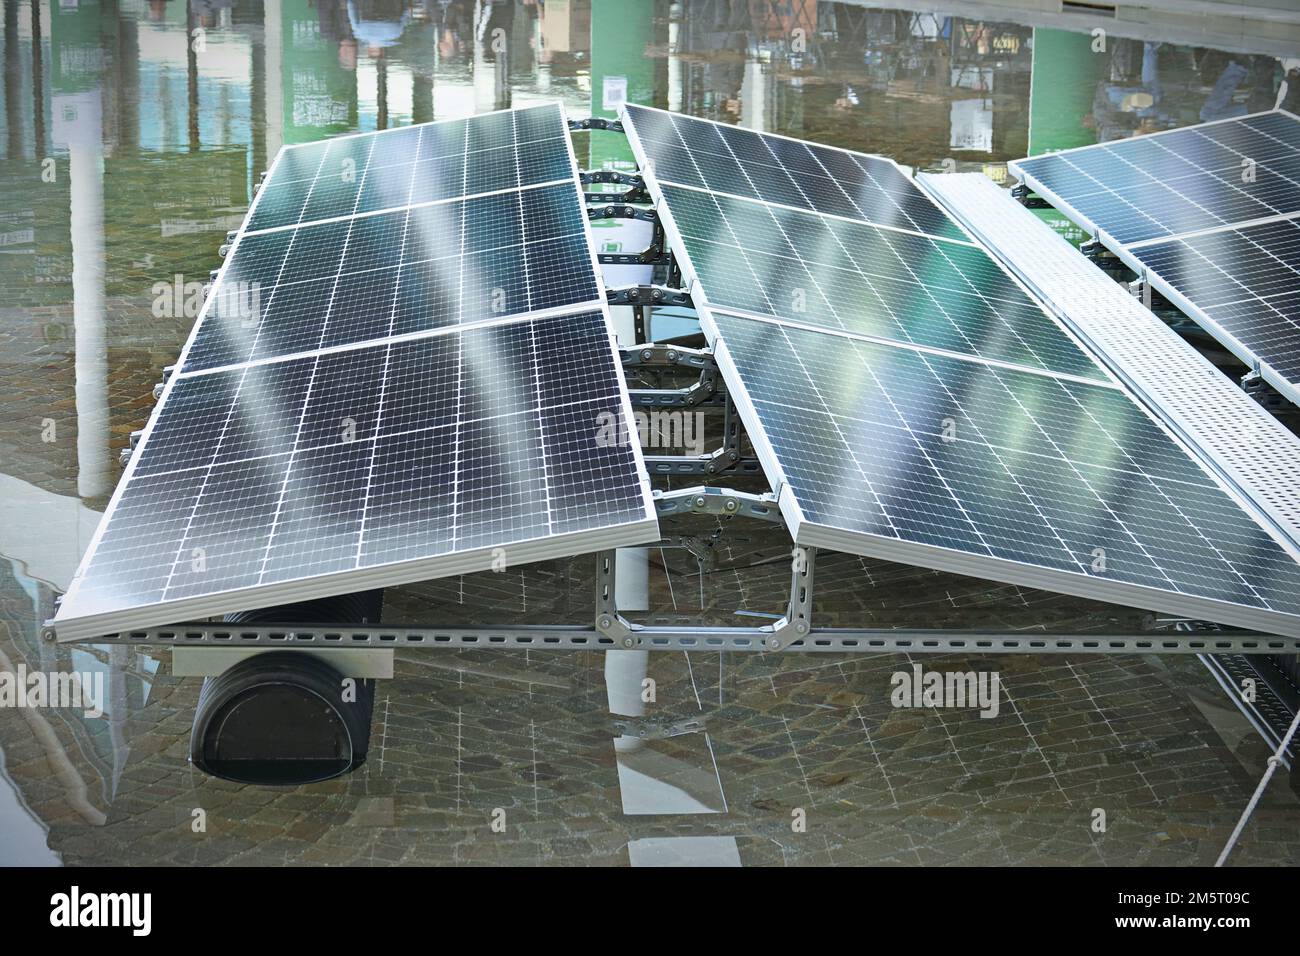 Floating frame module for photovoltaic system floating on water. Rimini, Italy - November 2022 Stock Photo